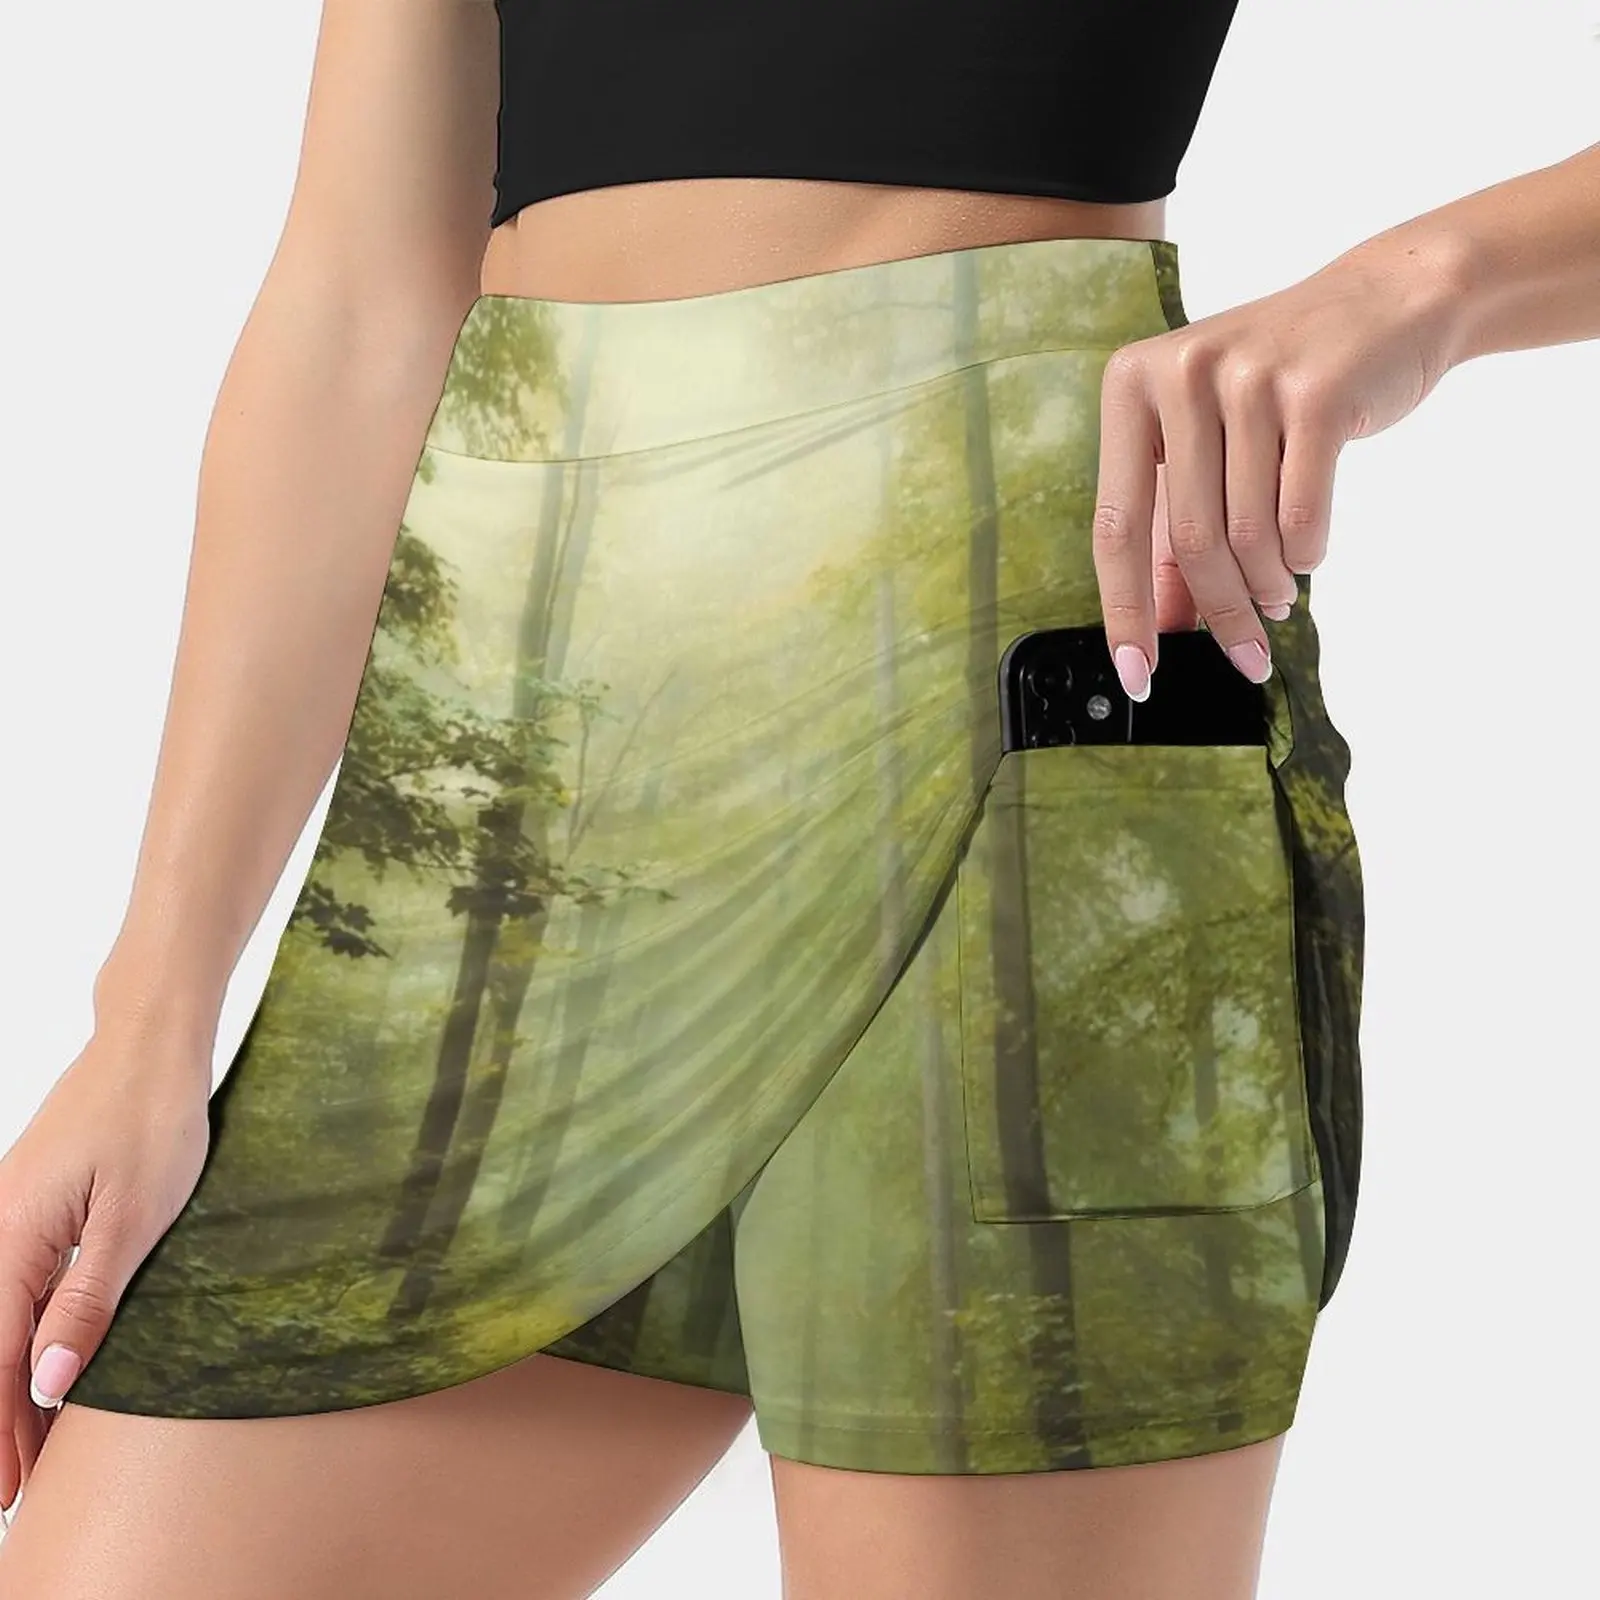 

Long Forest Walk Women's skirt Aesthetic skirts New Fashion Short Skirts Mystical Trees Adventure Nature Foggy Forest Hiking